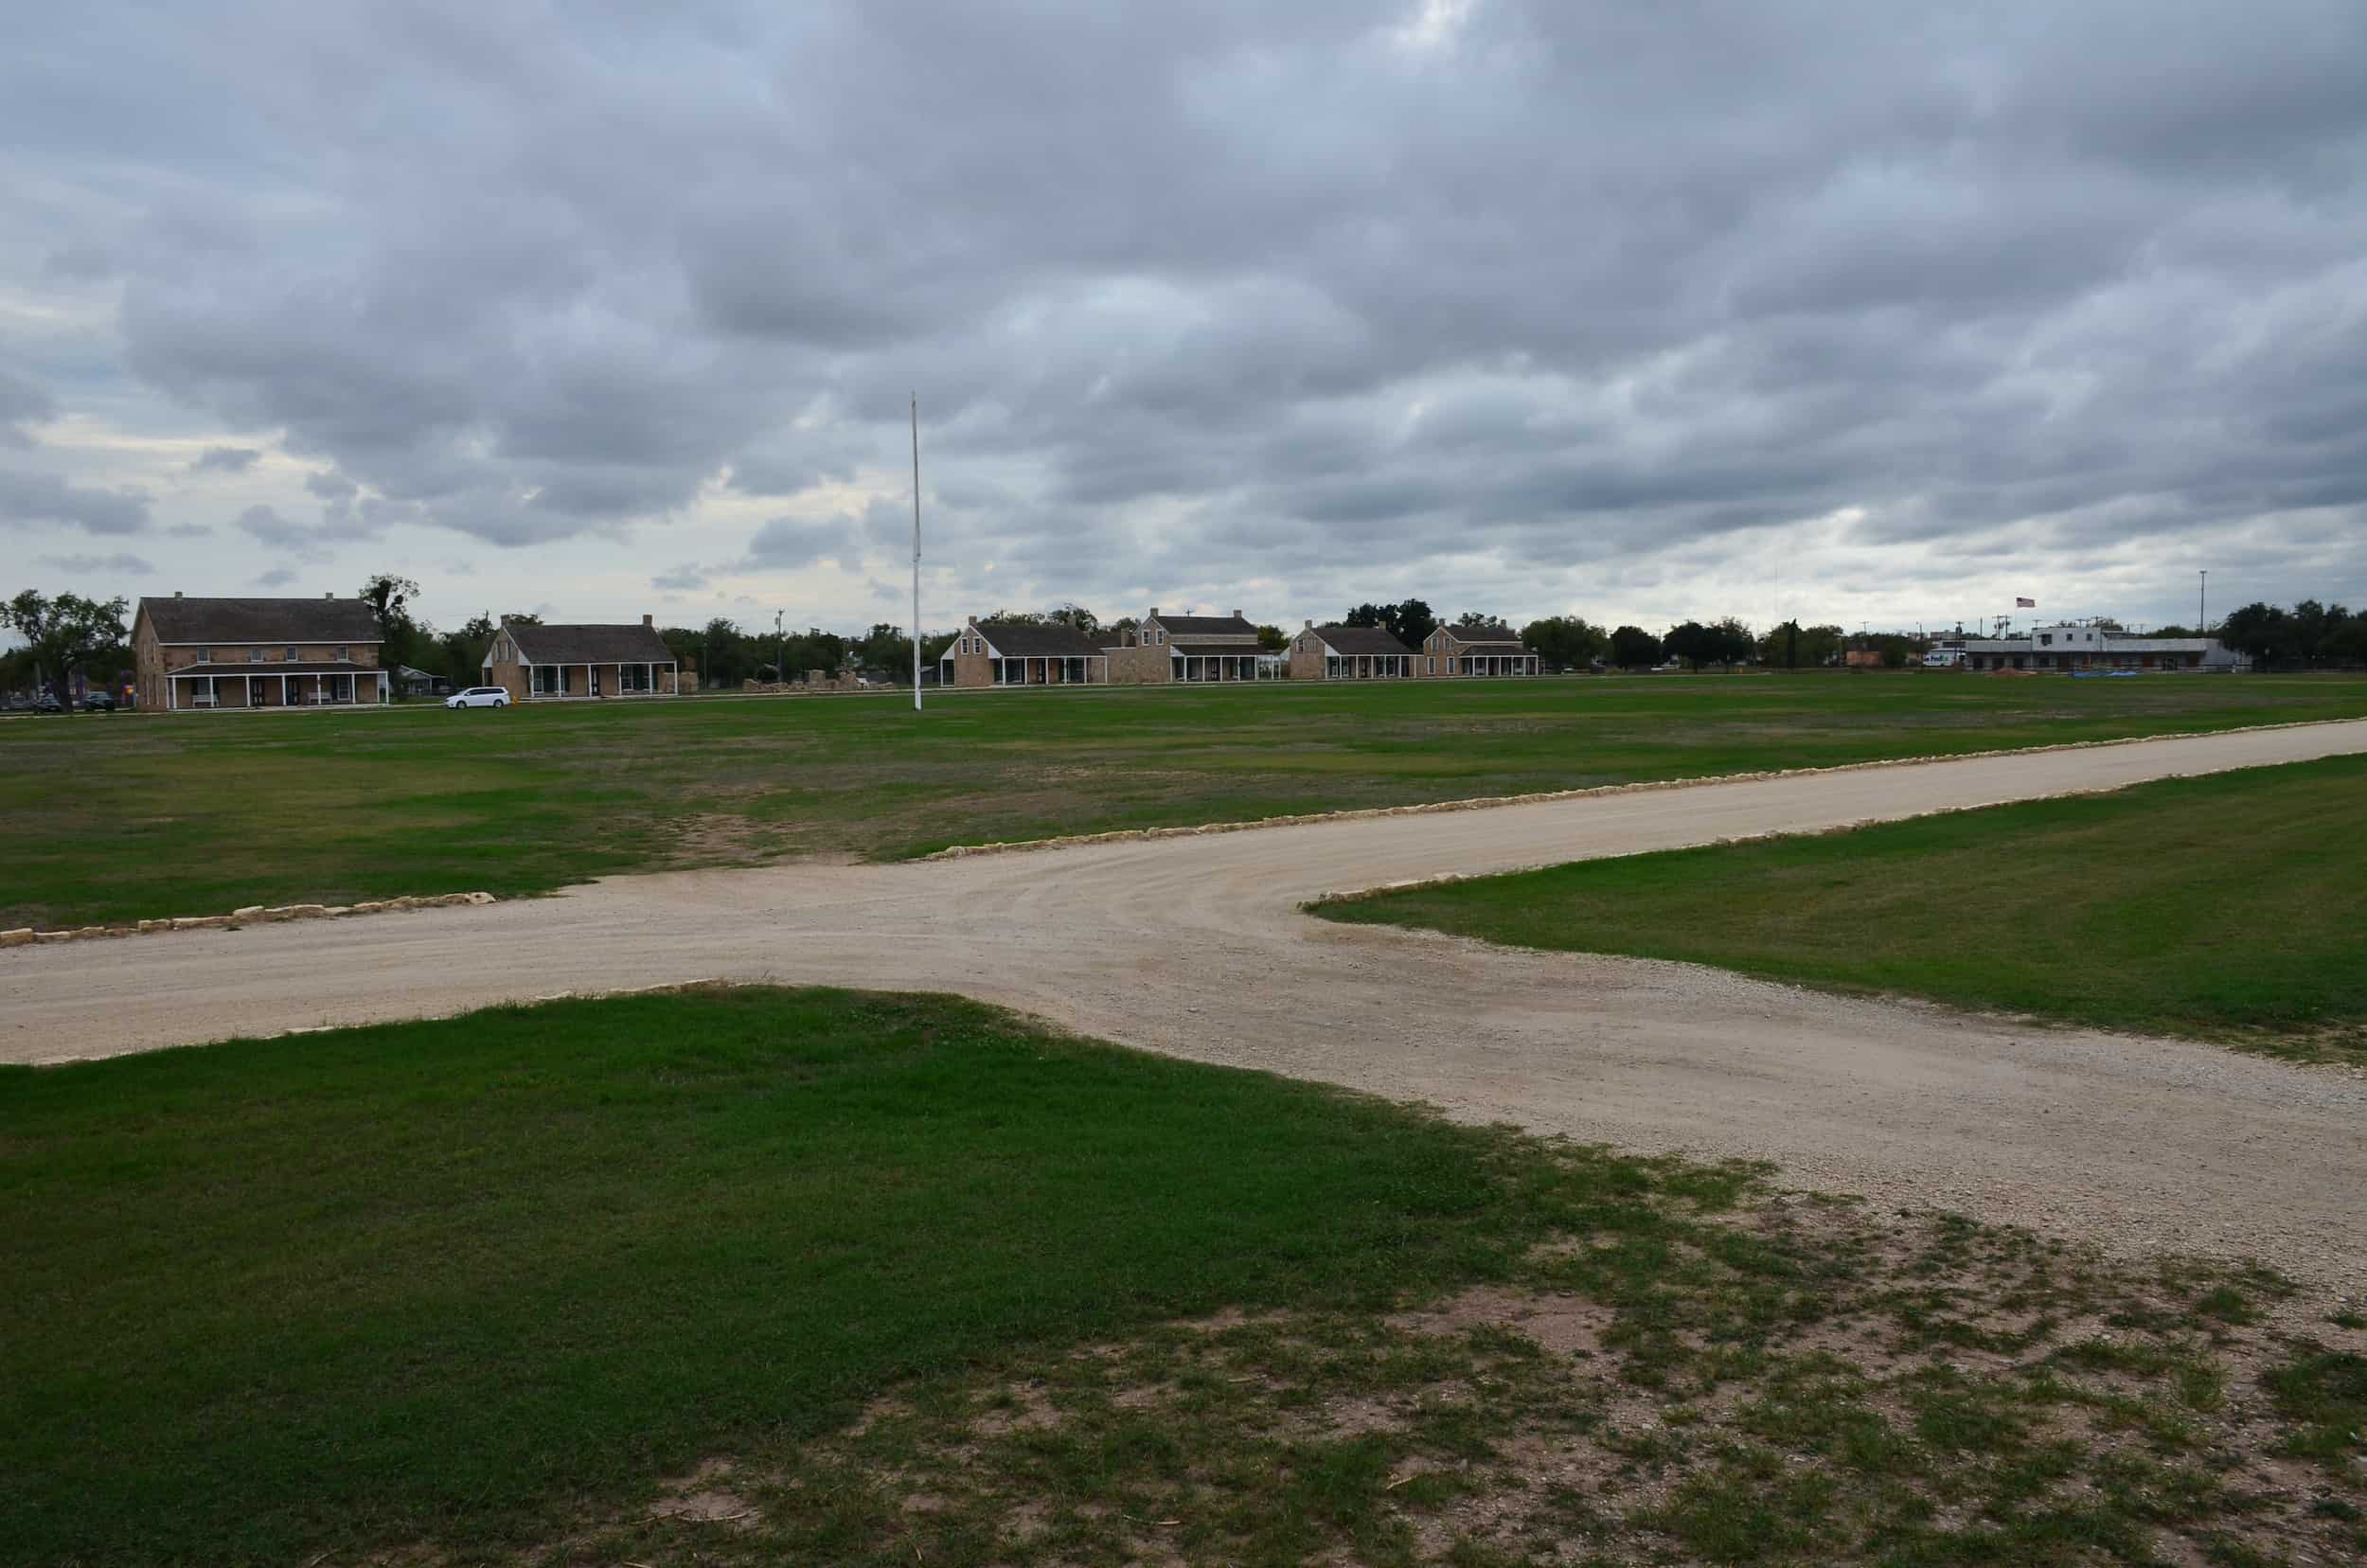 Parade ground at Fort Concho in San Angelo, Texas